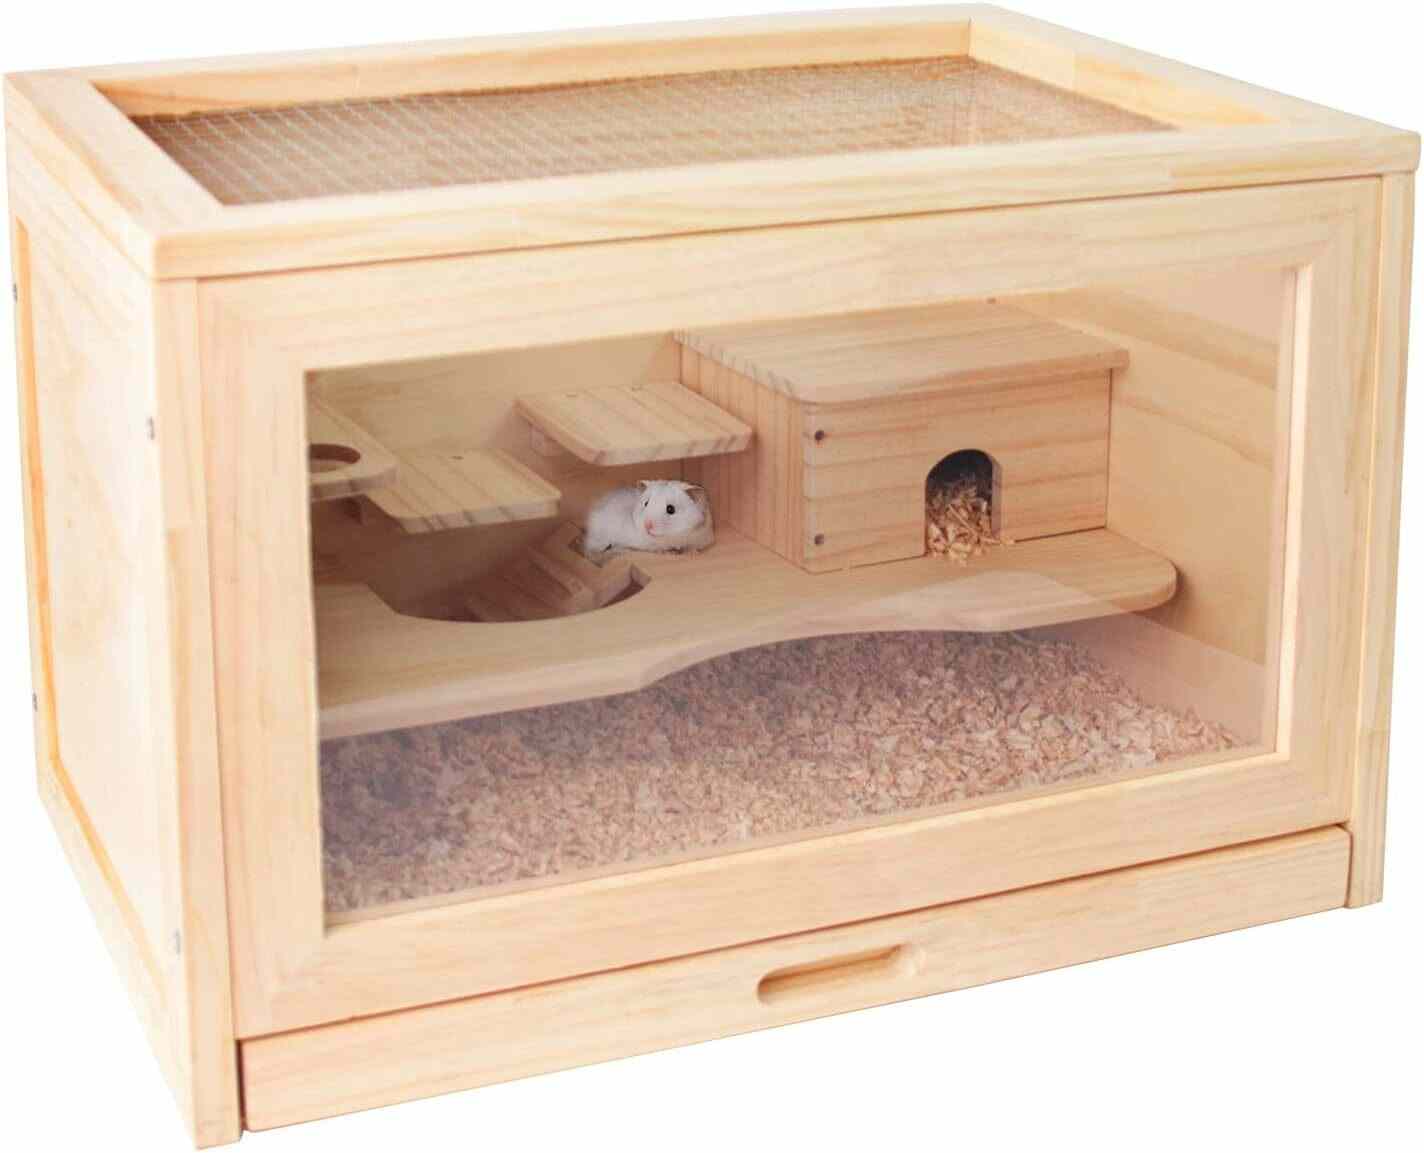 Kaiyopop Wooden Hamster Cage